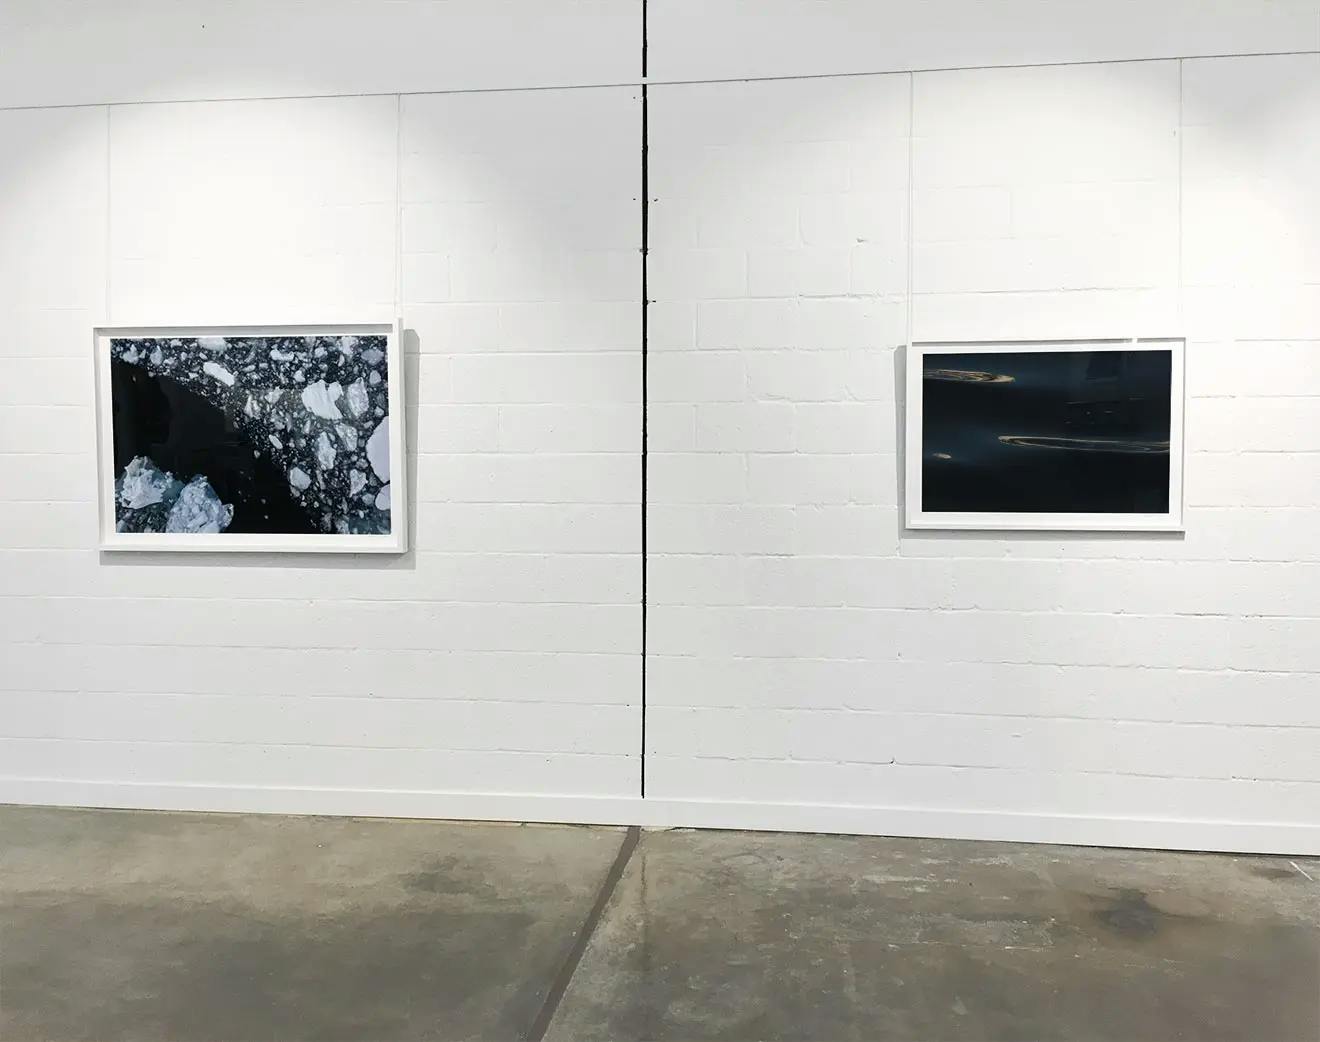 Artwork installed as part of At Scale, one of Uprise Art's Exhibitions in Dallas, TX.